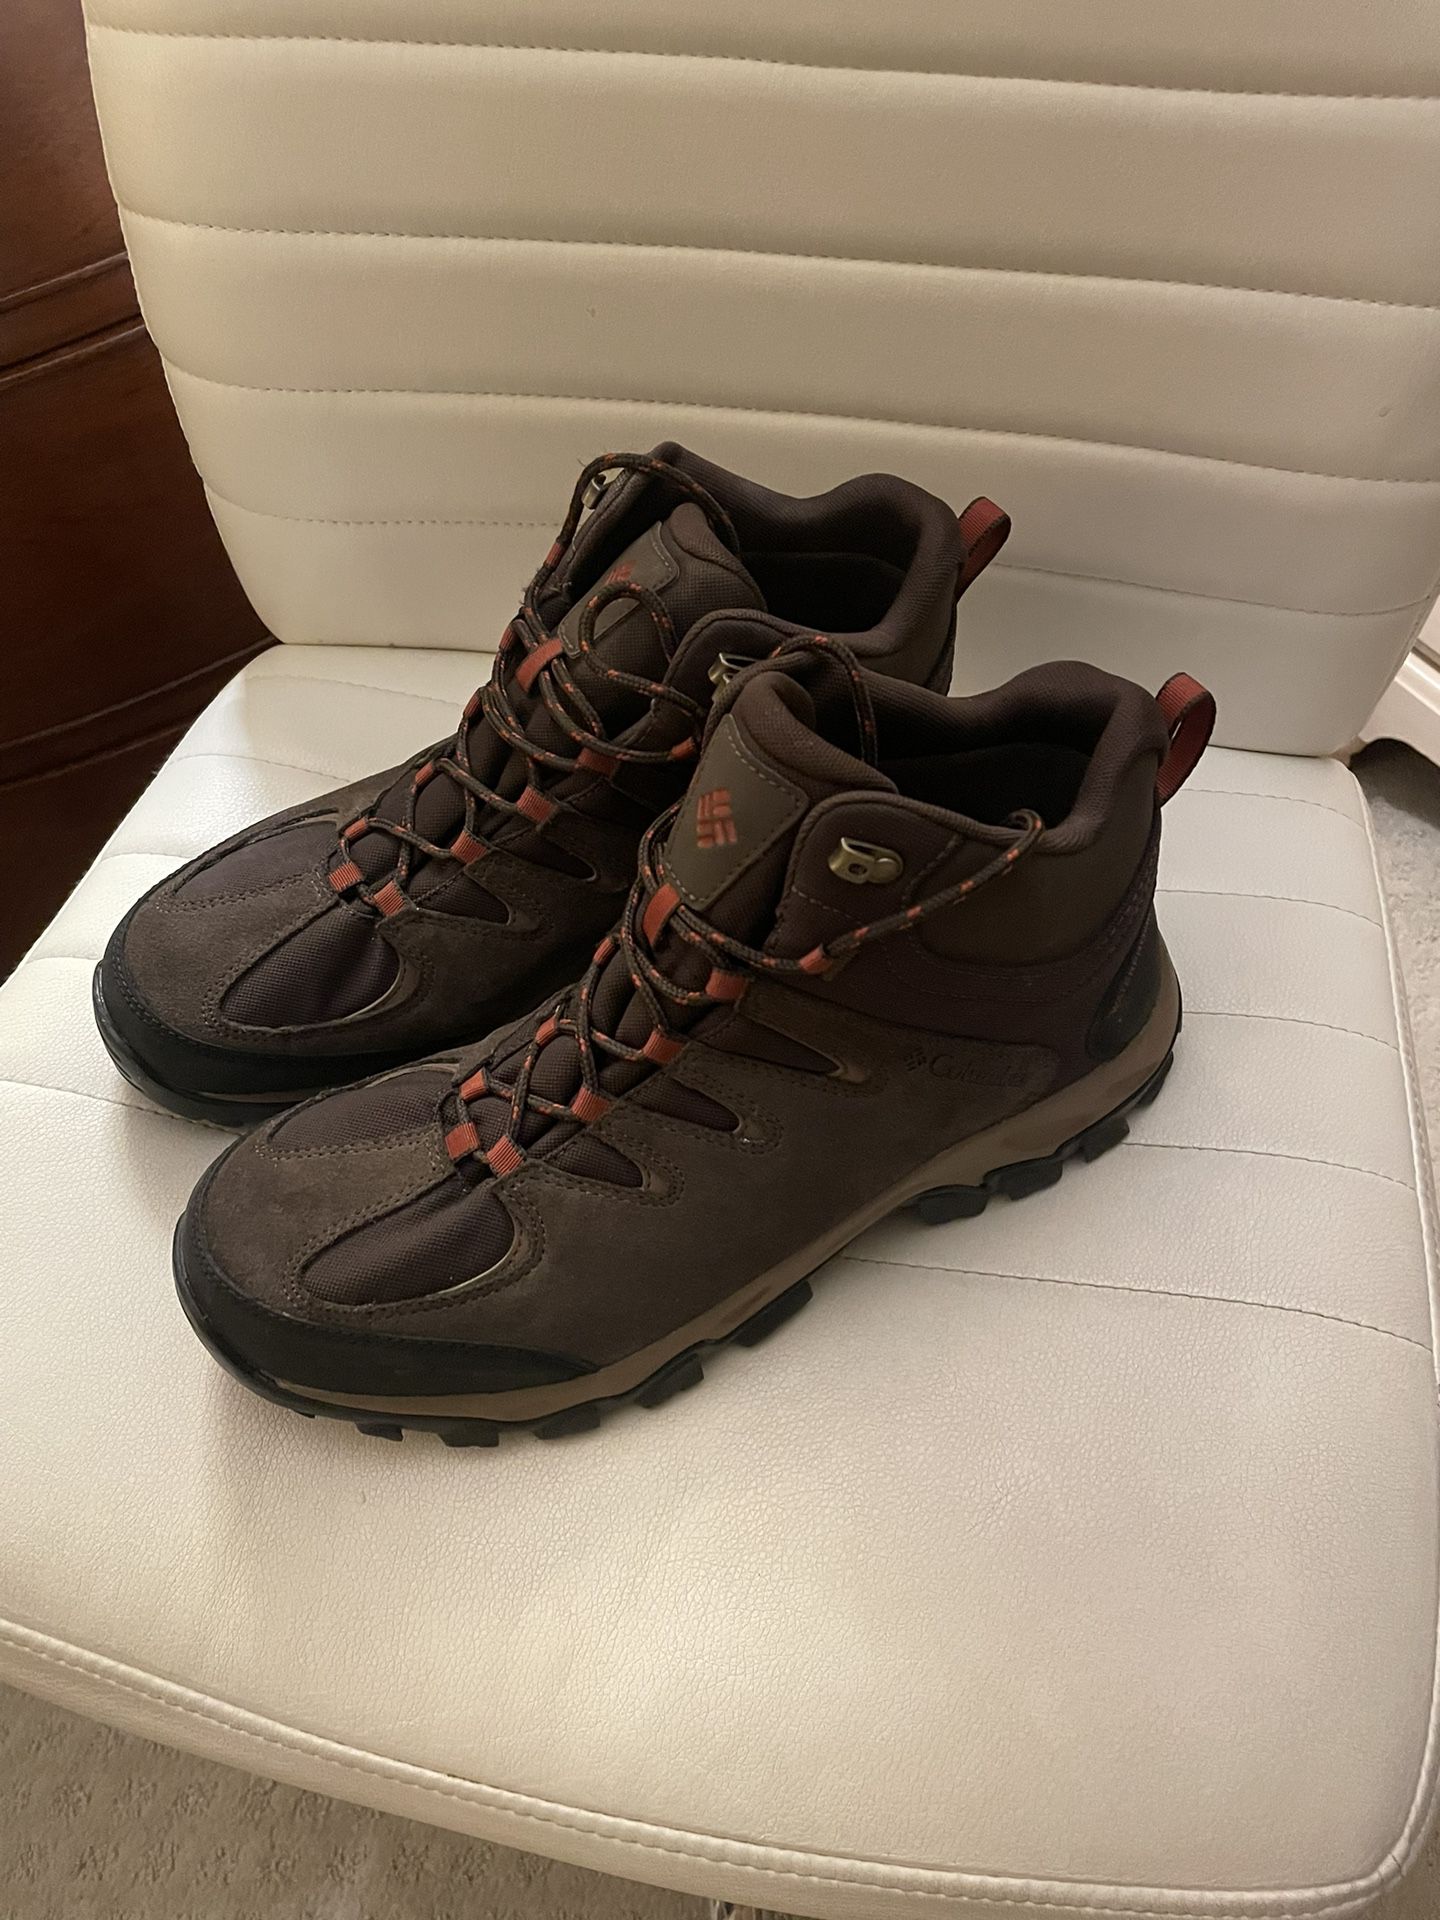 Columbia Outlander Crest boots Size 11Wide Male